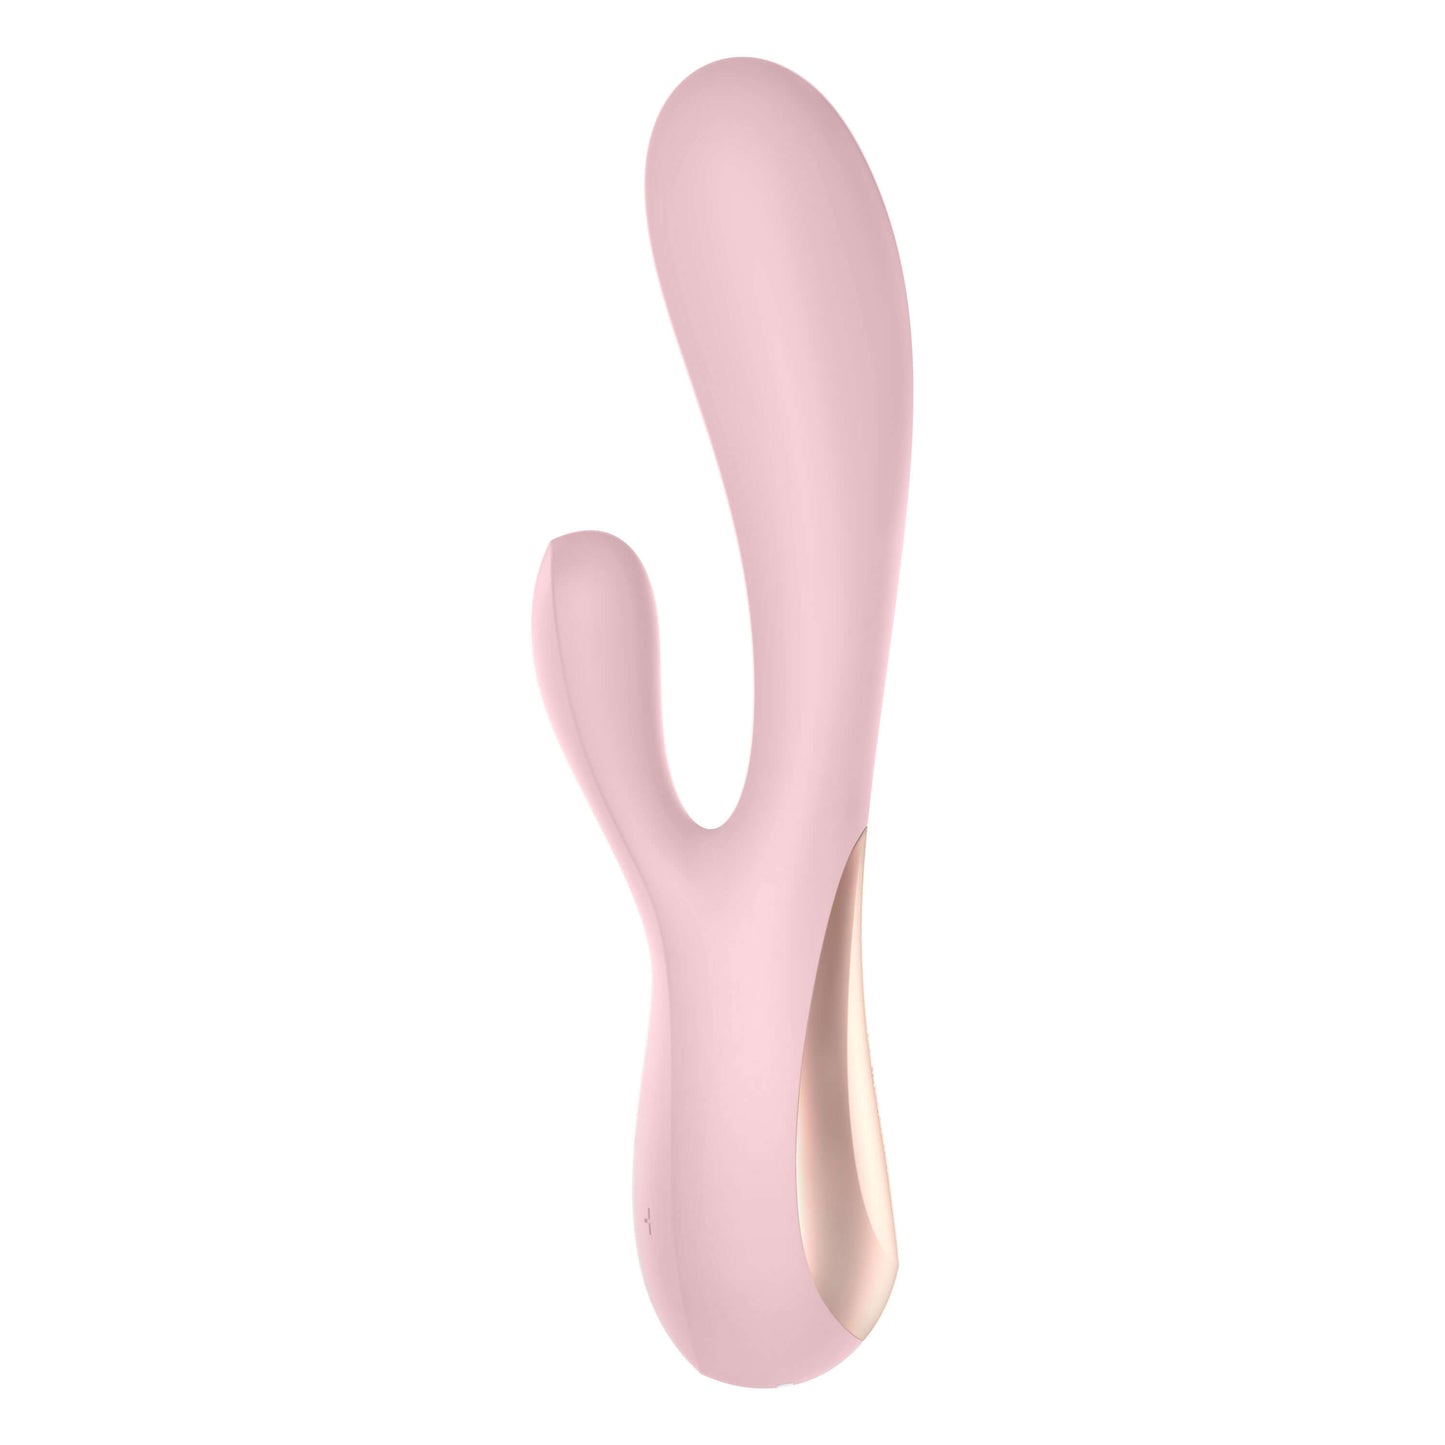 Satisfyer Mono Flex Rabbit Vibrator in Mauve - by The Bigger O - an online sex toy shop. We ship to USA, Canada and the UK.